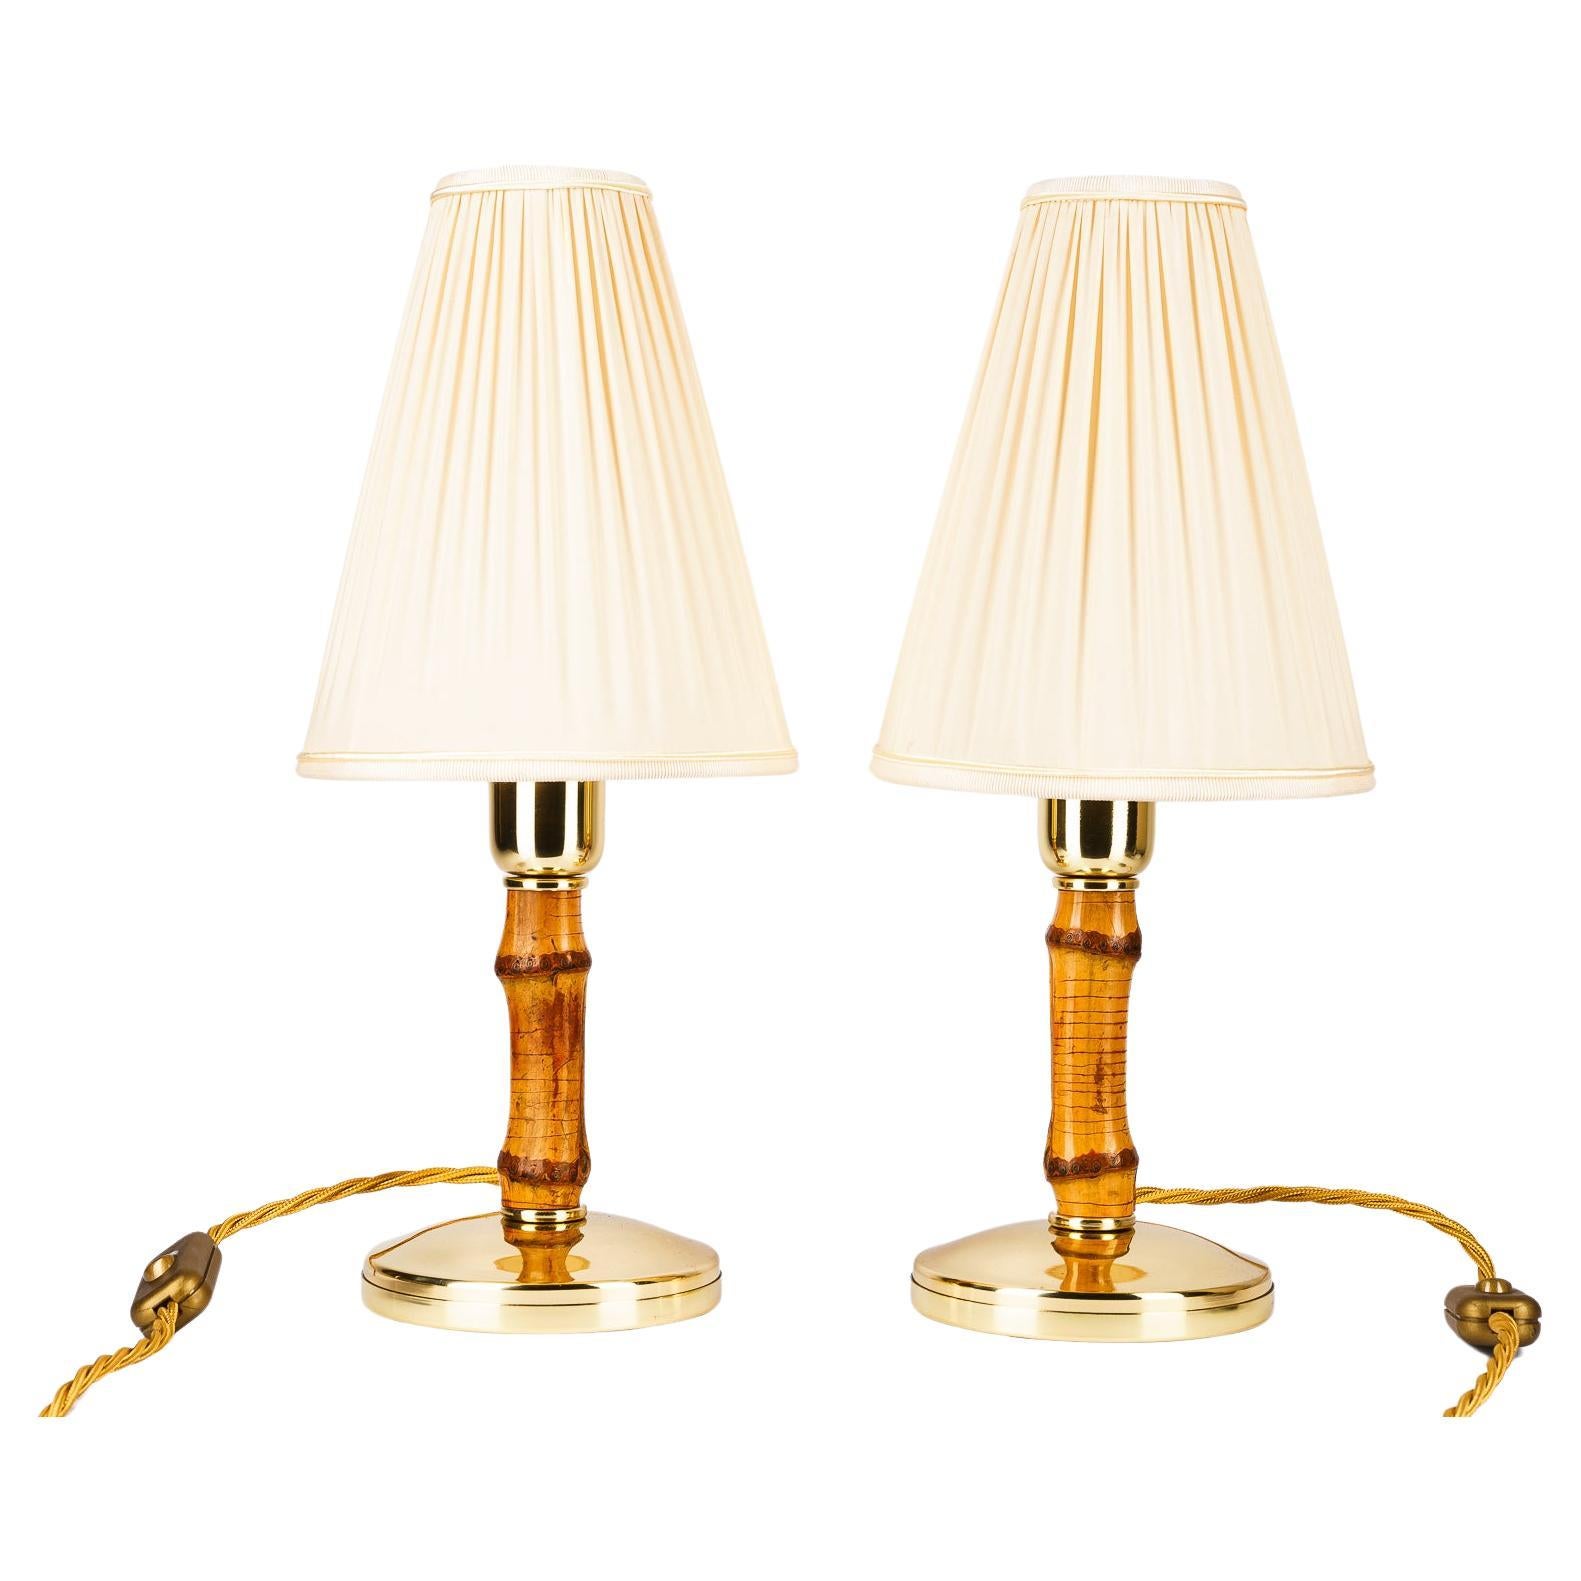 2 Rupert Nikoll Bamboo Table Lamps with Fabric Shades Austria Around 1950s